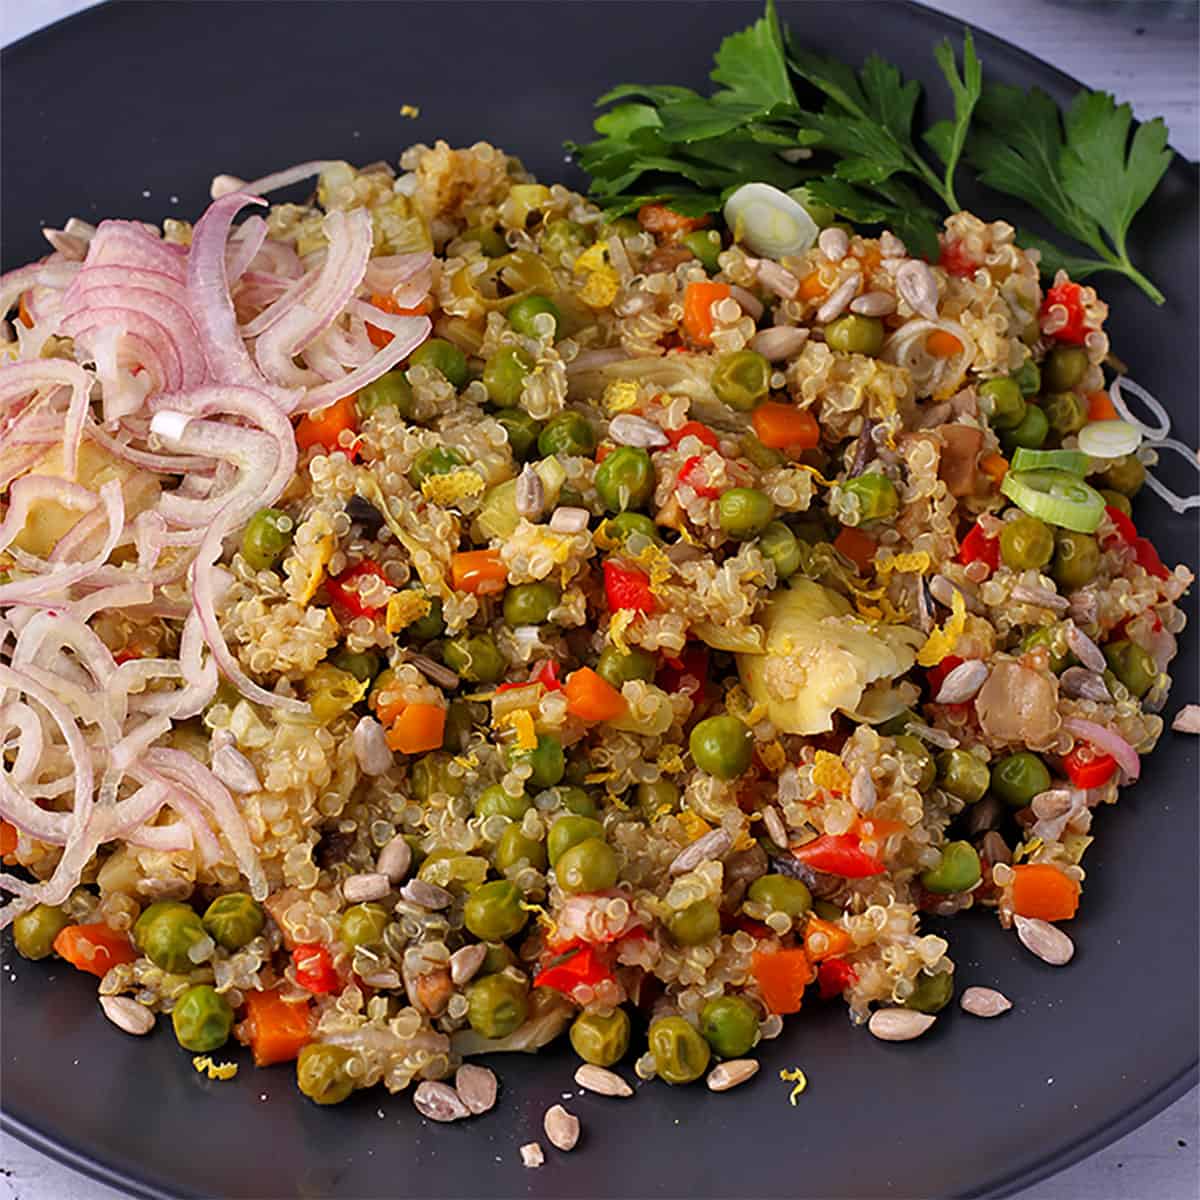 Cooked quinoa with vegetables on black plate with sliced shallots.